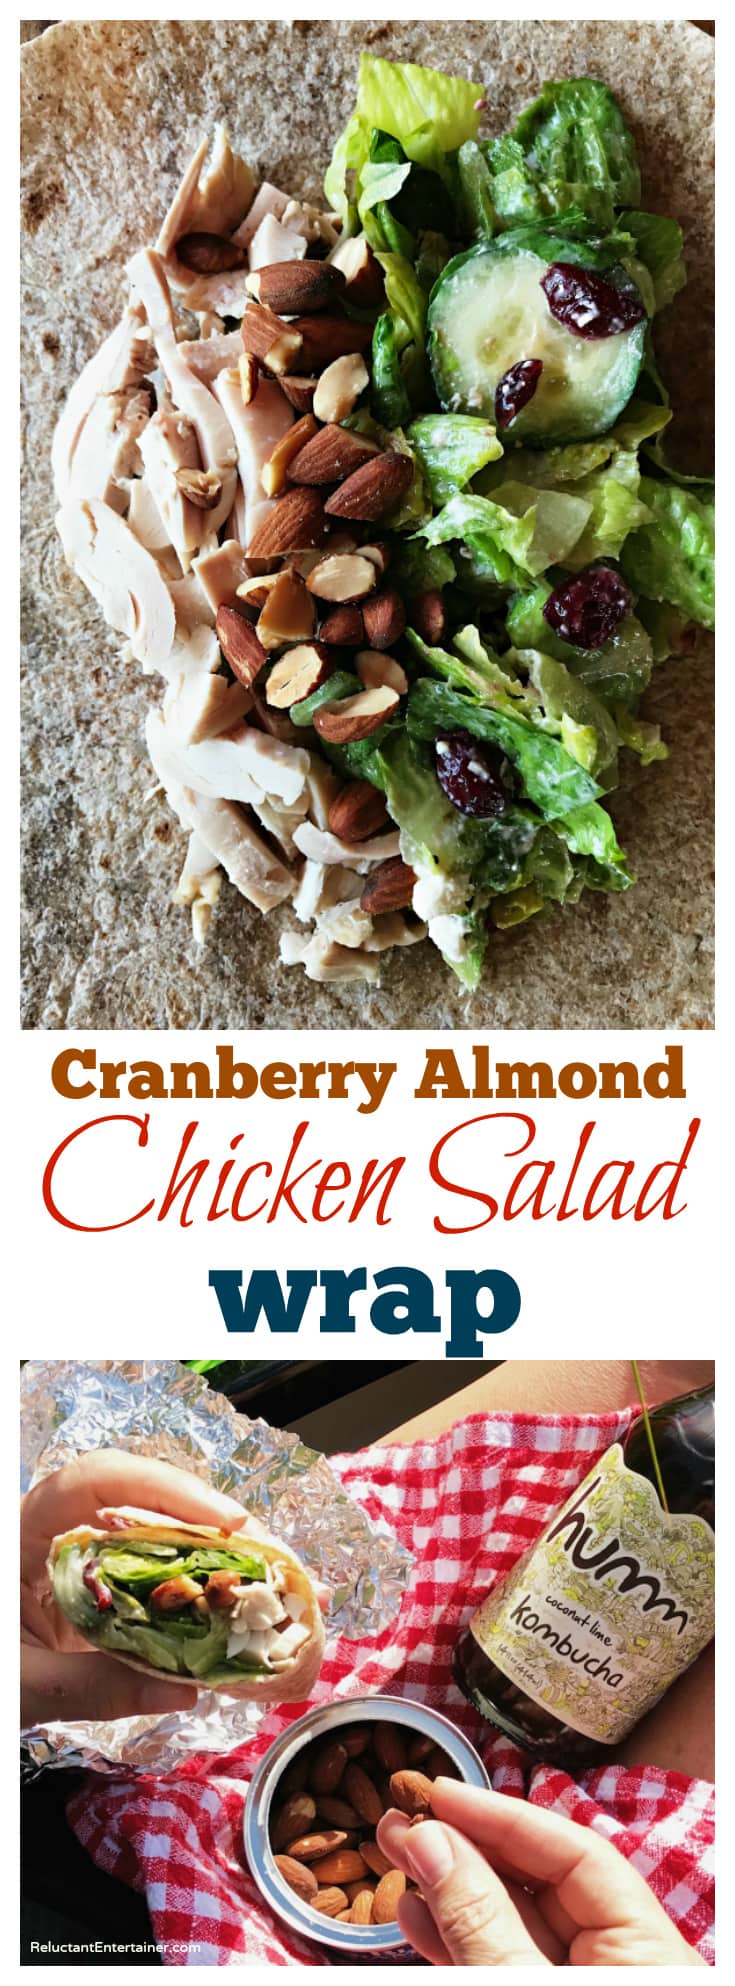 Cranberry Almond Chicken Salad Wrap in partnership with Blue Diamond Almonds